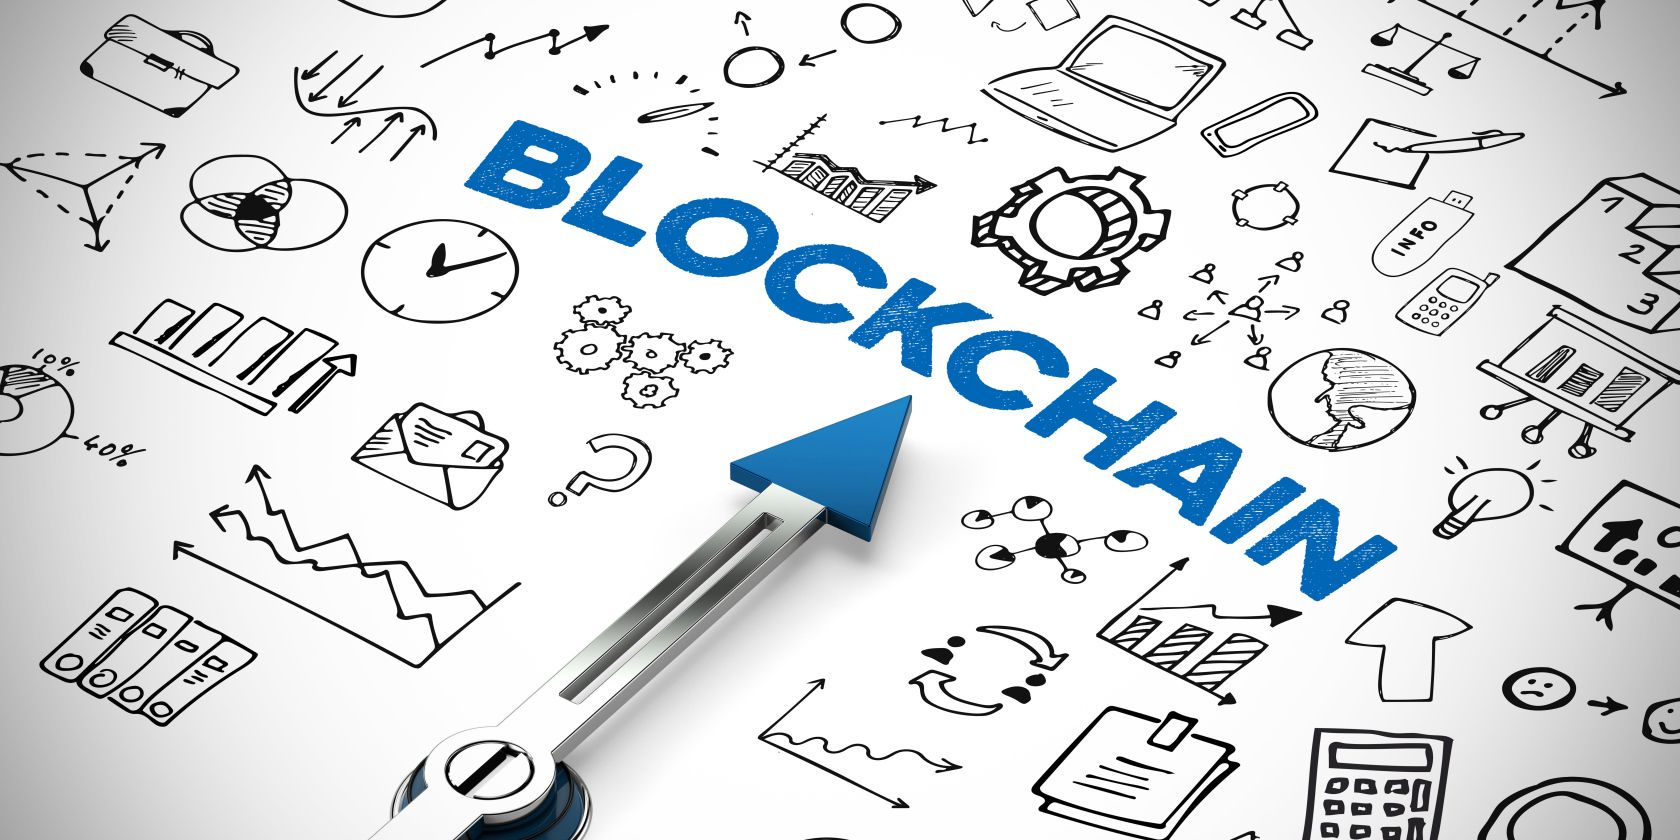 What is Blockchain Interoperability and how does it work?